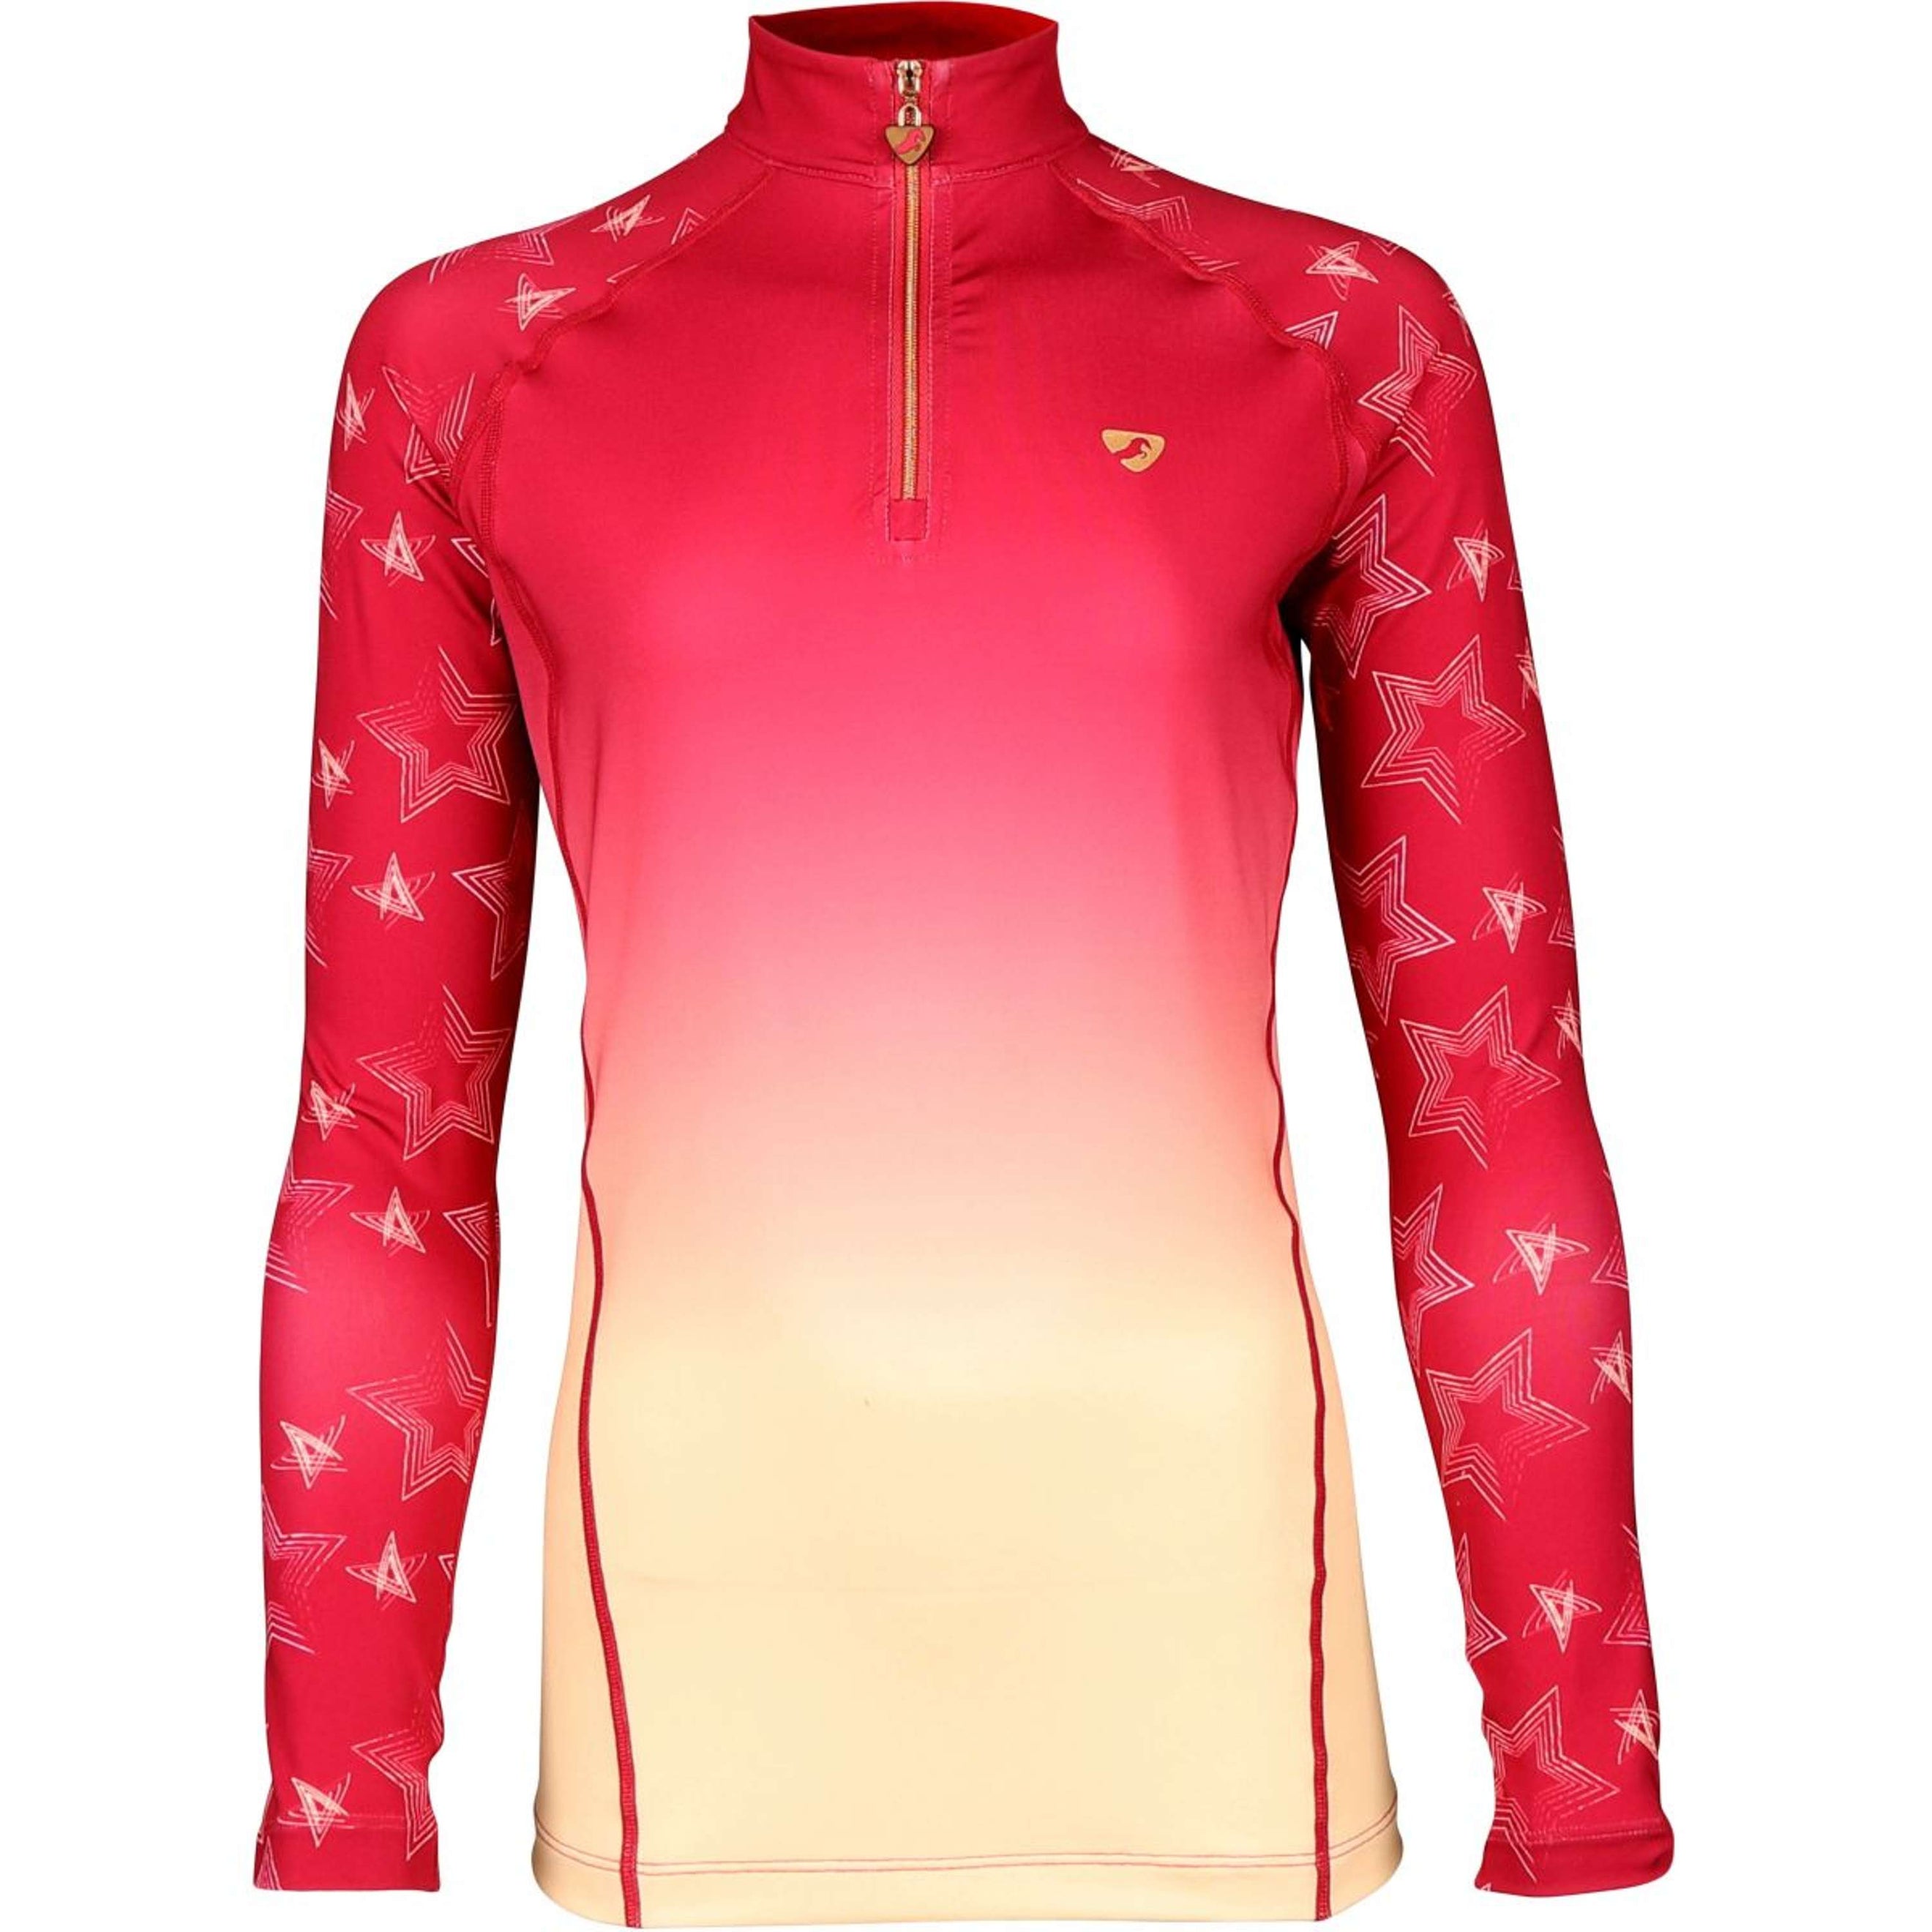 Aubrion Base Layer Hyde Park Young Rider Star